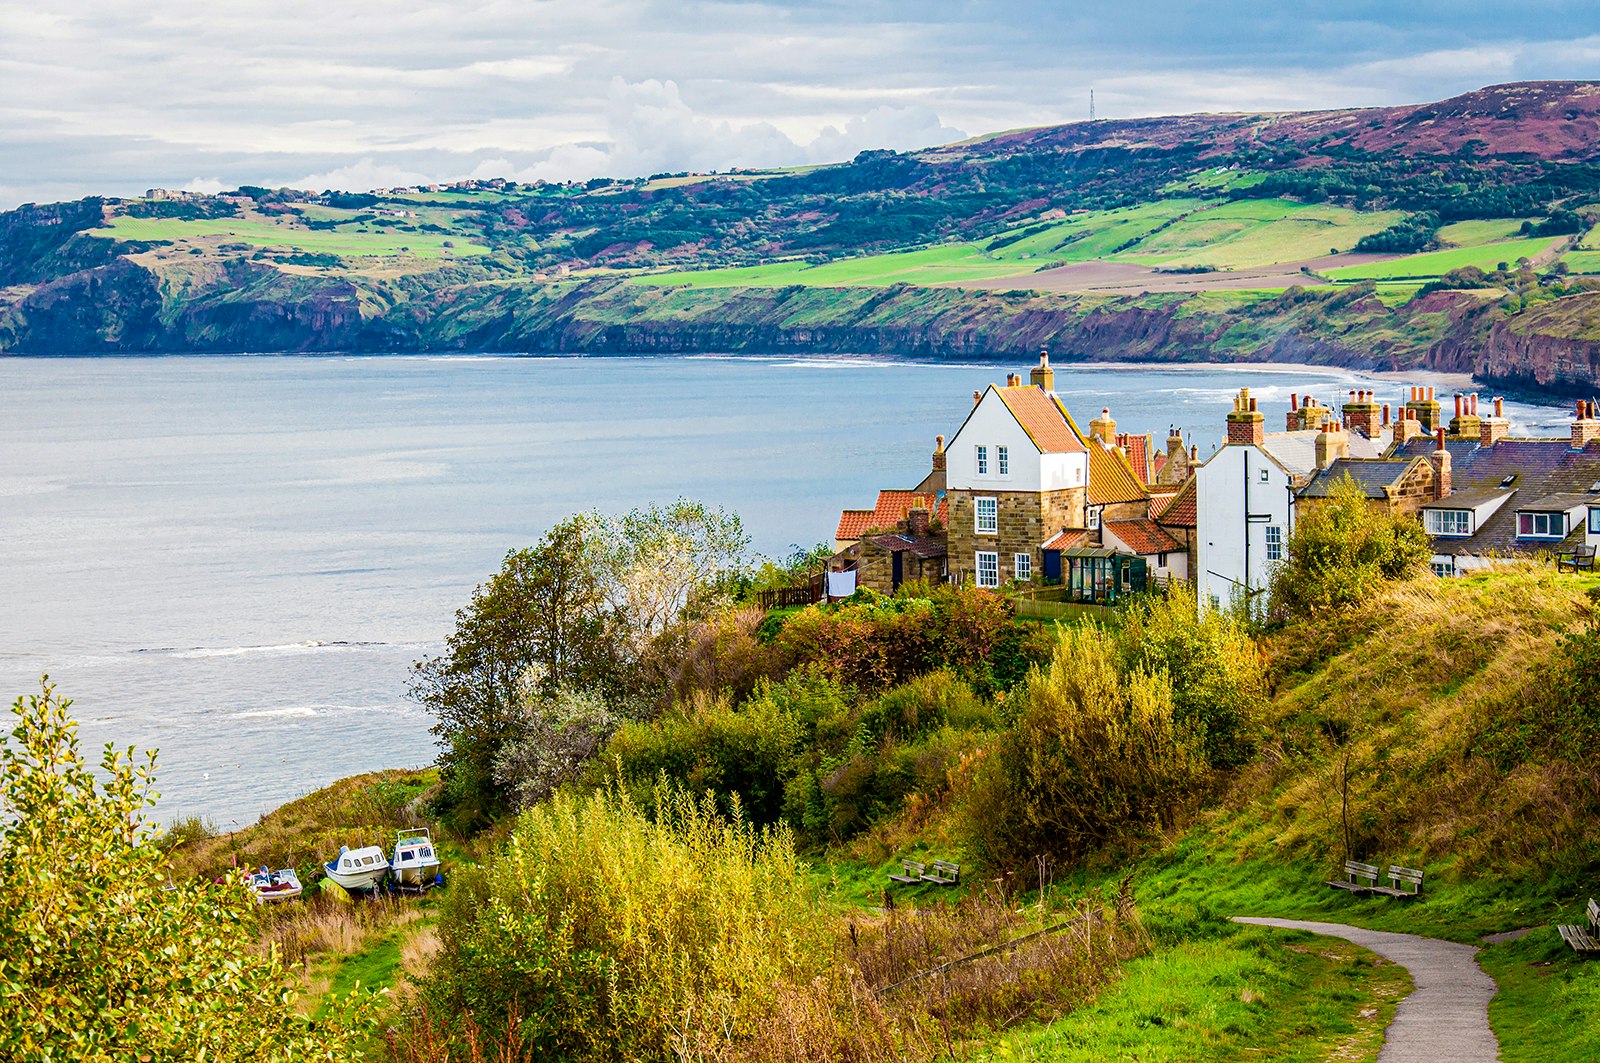 A small path leads to a fishing community with historic white buildings with orange roofs. The town sits on the edge of a bay with rolling green hills in the background. England.